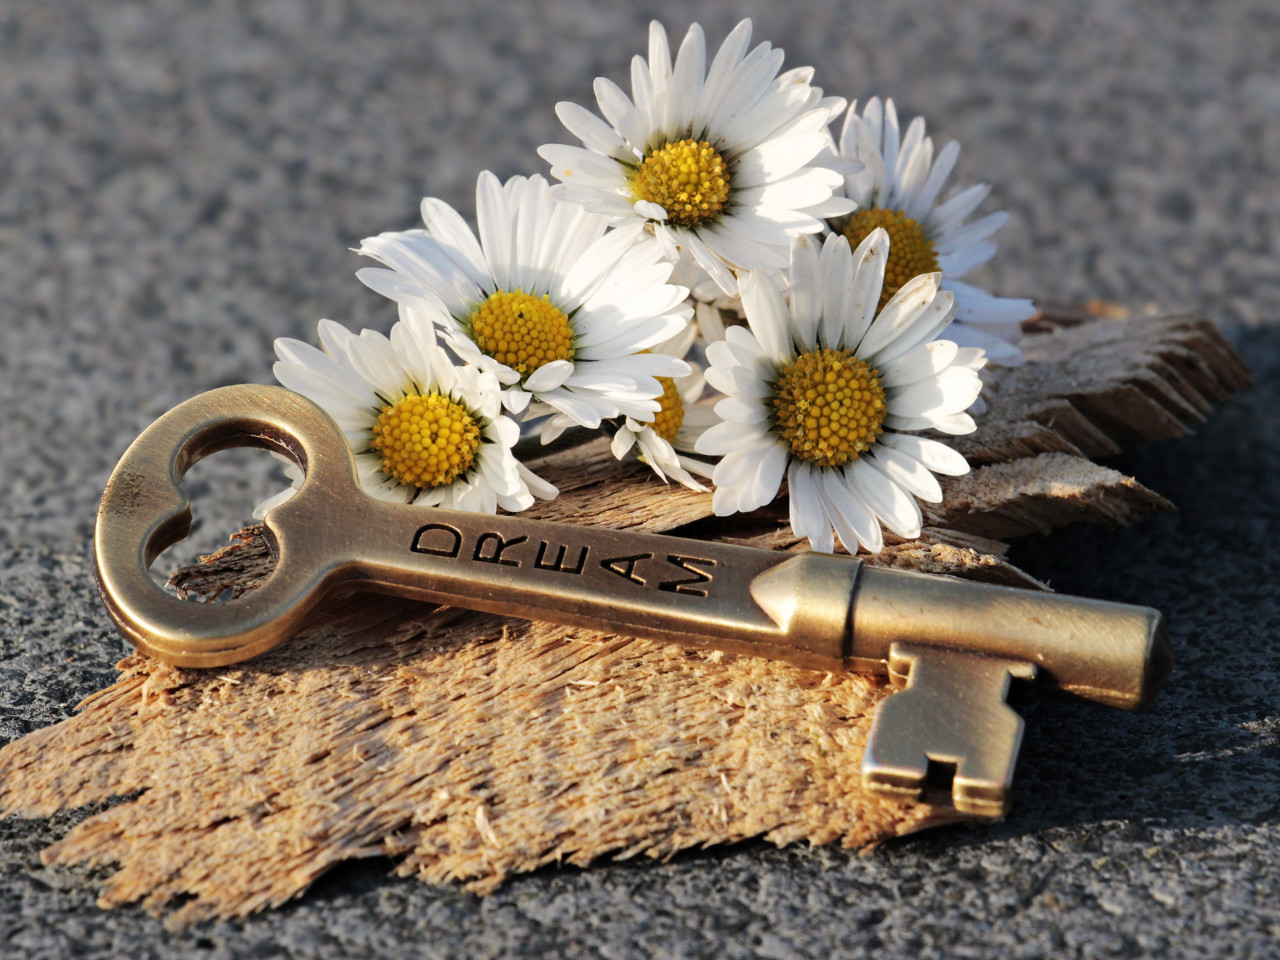 The dreams key and daisy flowers wallpaper 1280x960